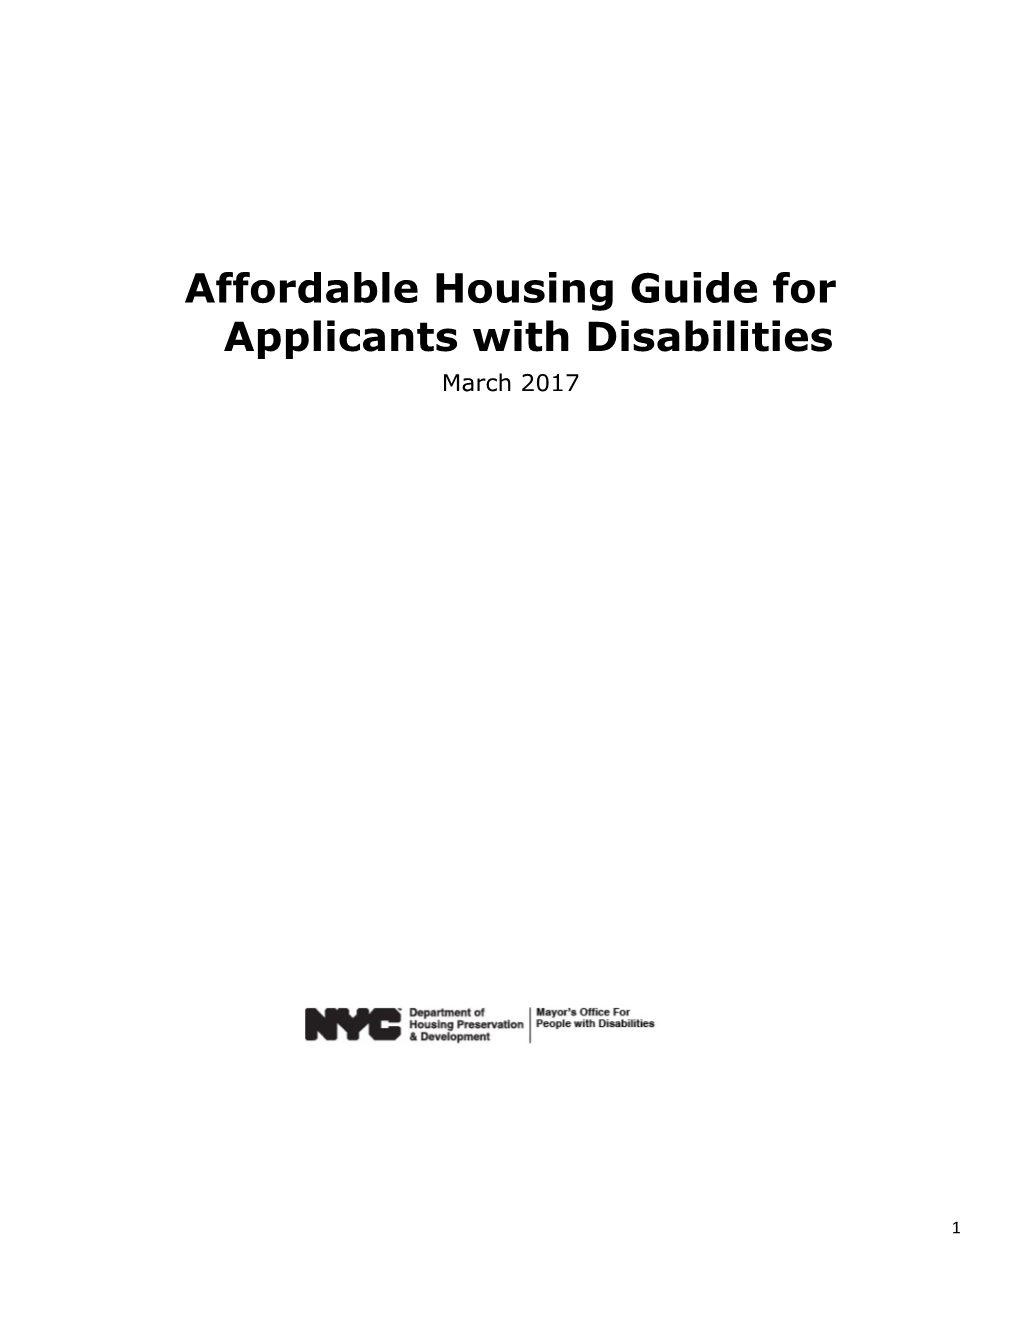 Affordable Housing Guide for Applicants with Disabilities